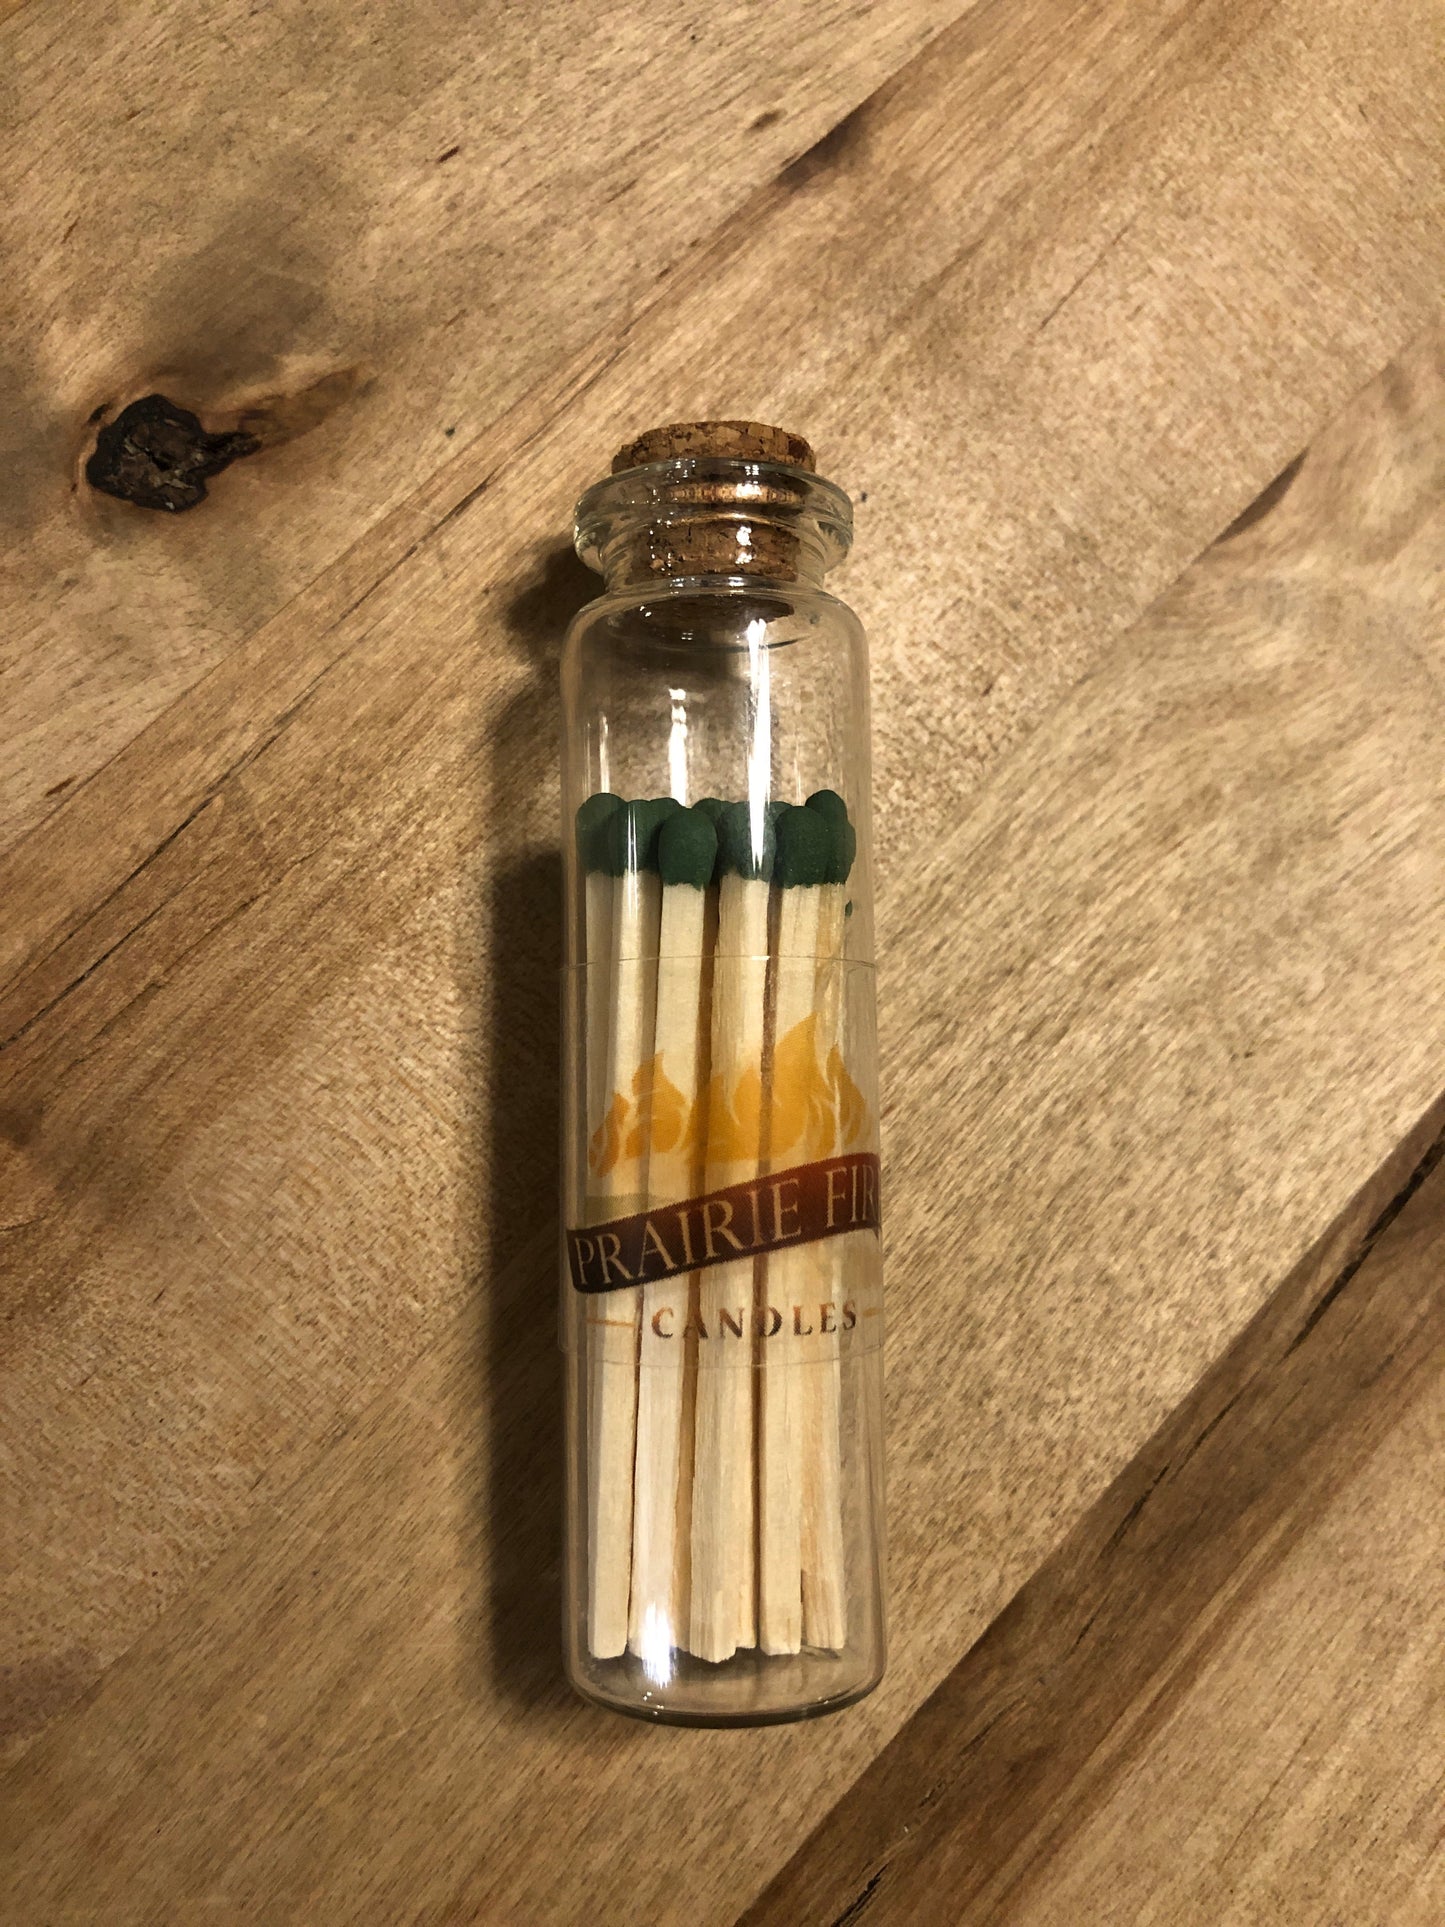 Apothecary Jar Wooden Matches | Matchstick Jar | Honeycomb Strike On Bottle | Glass Vial | 21 Matches | Responsibly Managed Forests-4